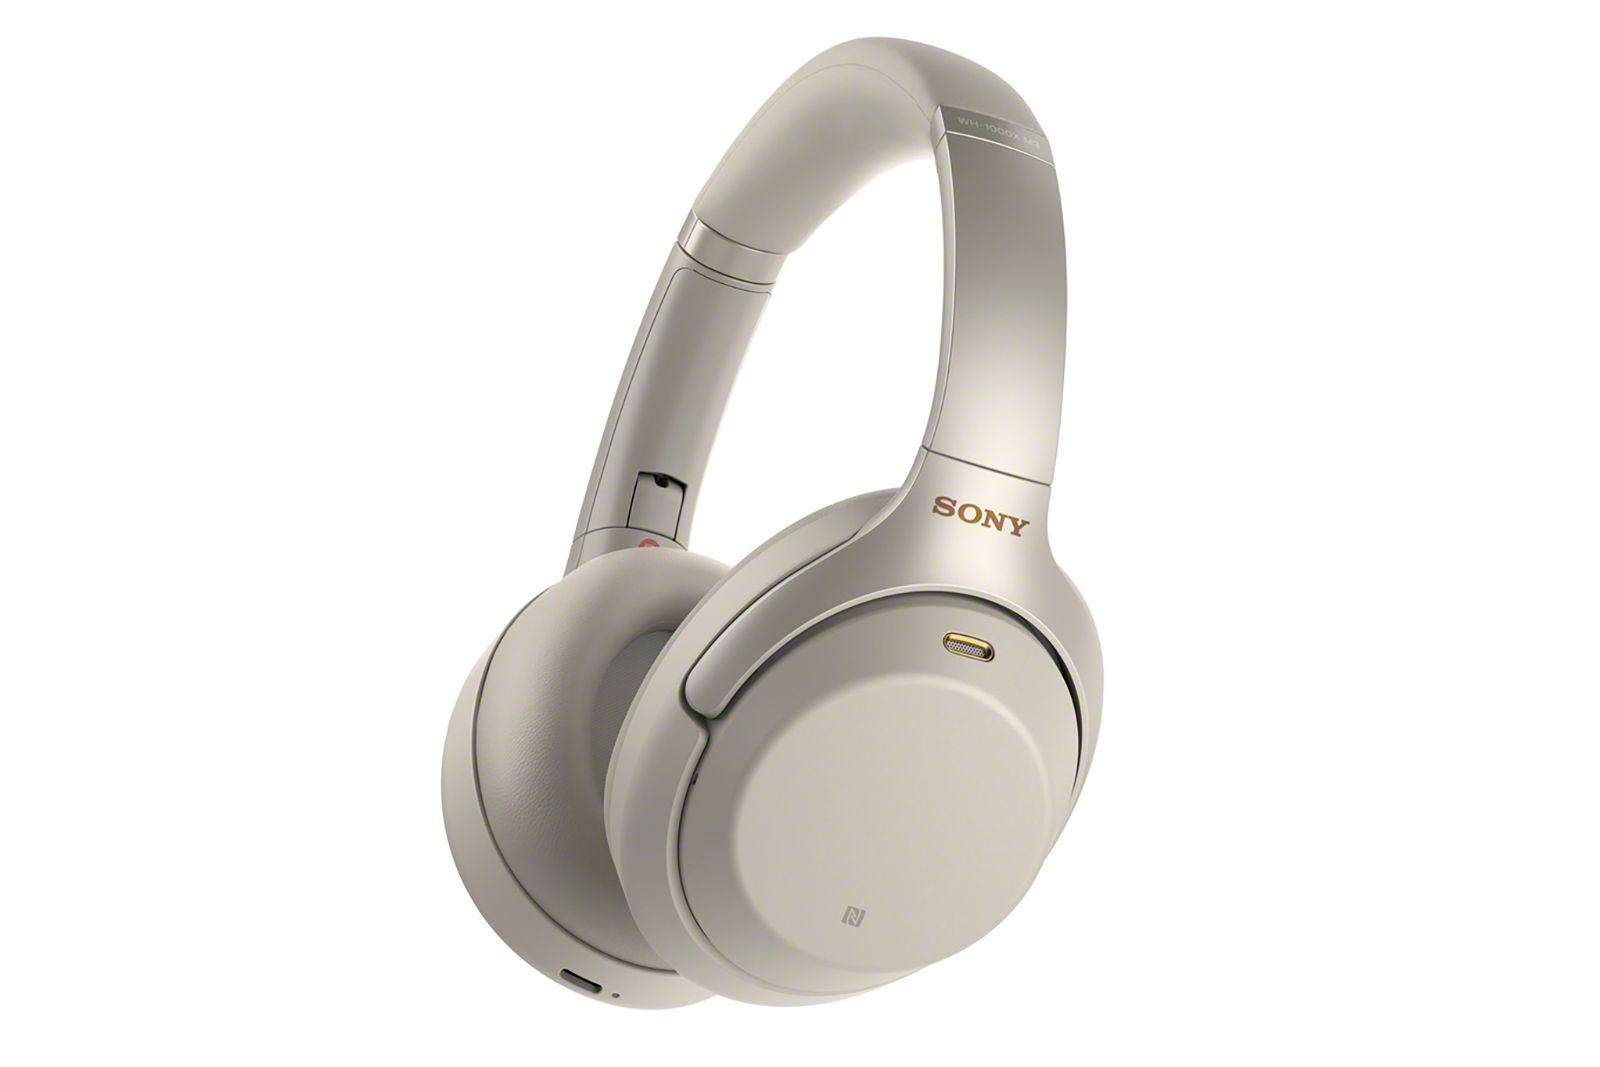 Sony WH-1000MX3 wireless headphones take ANC to another level image 2